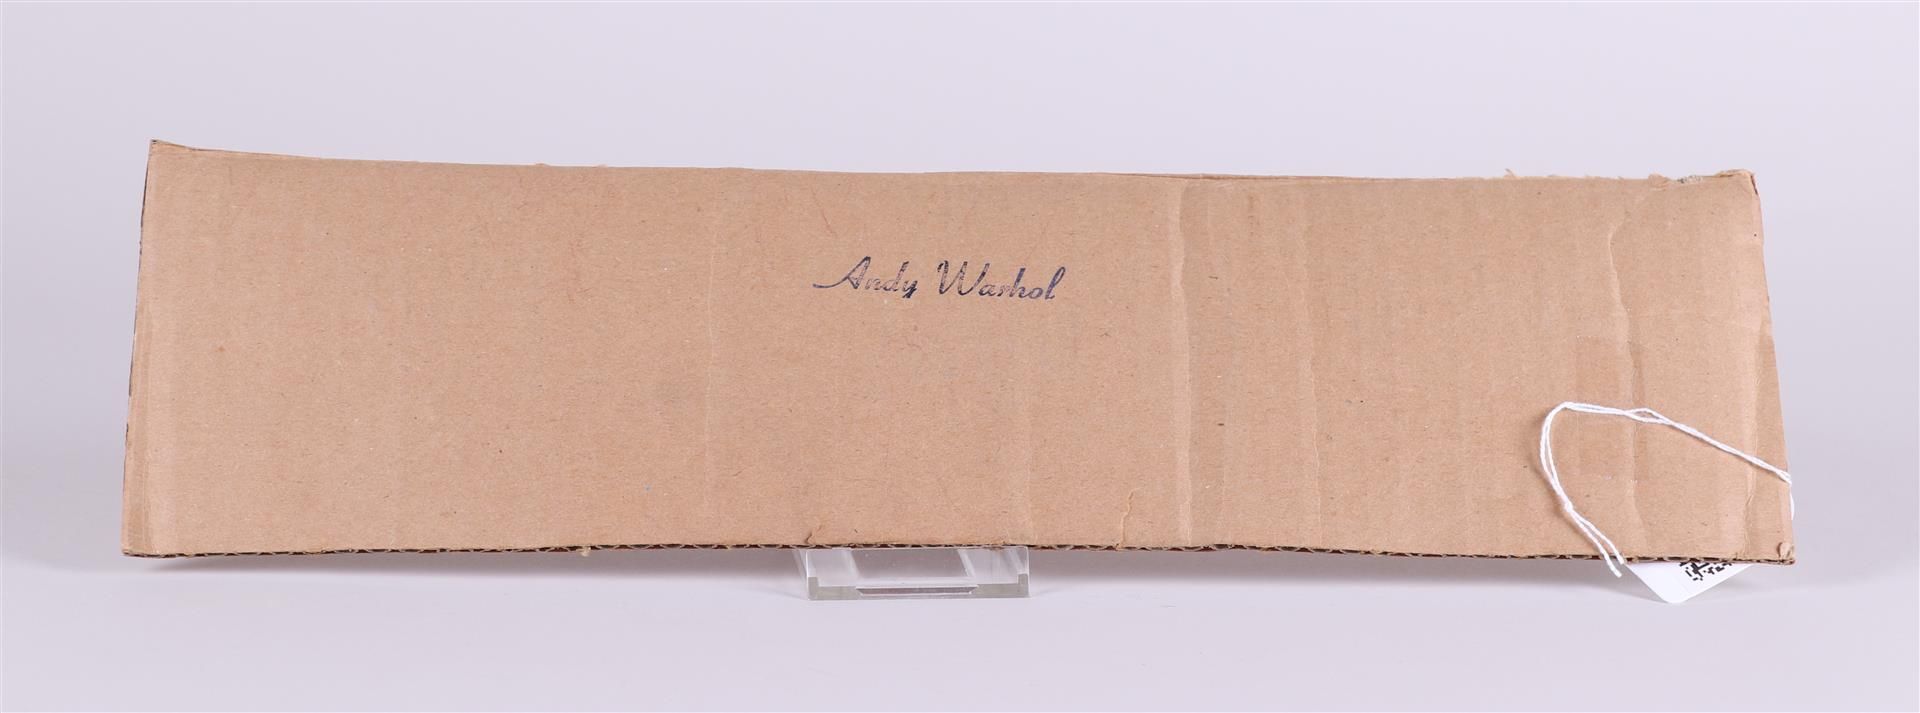 Andy Warhol (Pittsburg 1928 - 1987 New York), (after), A signature on a  Marlboro cardboard - Image 2 of 3